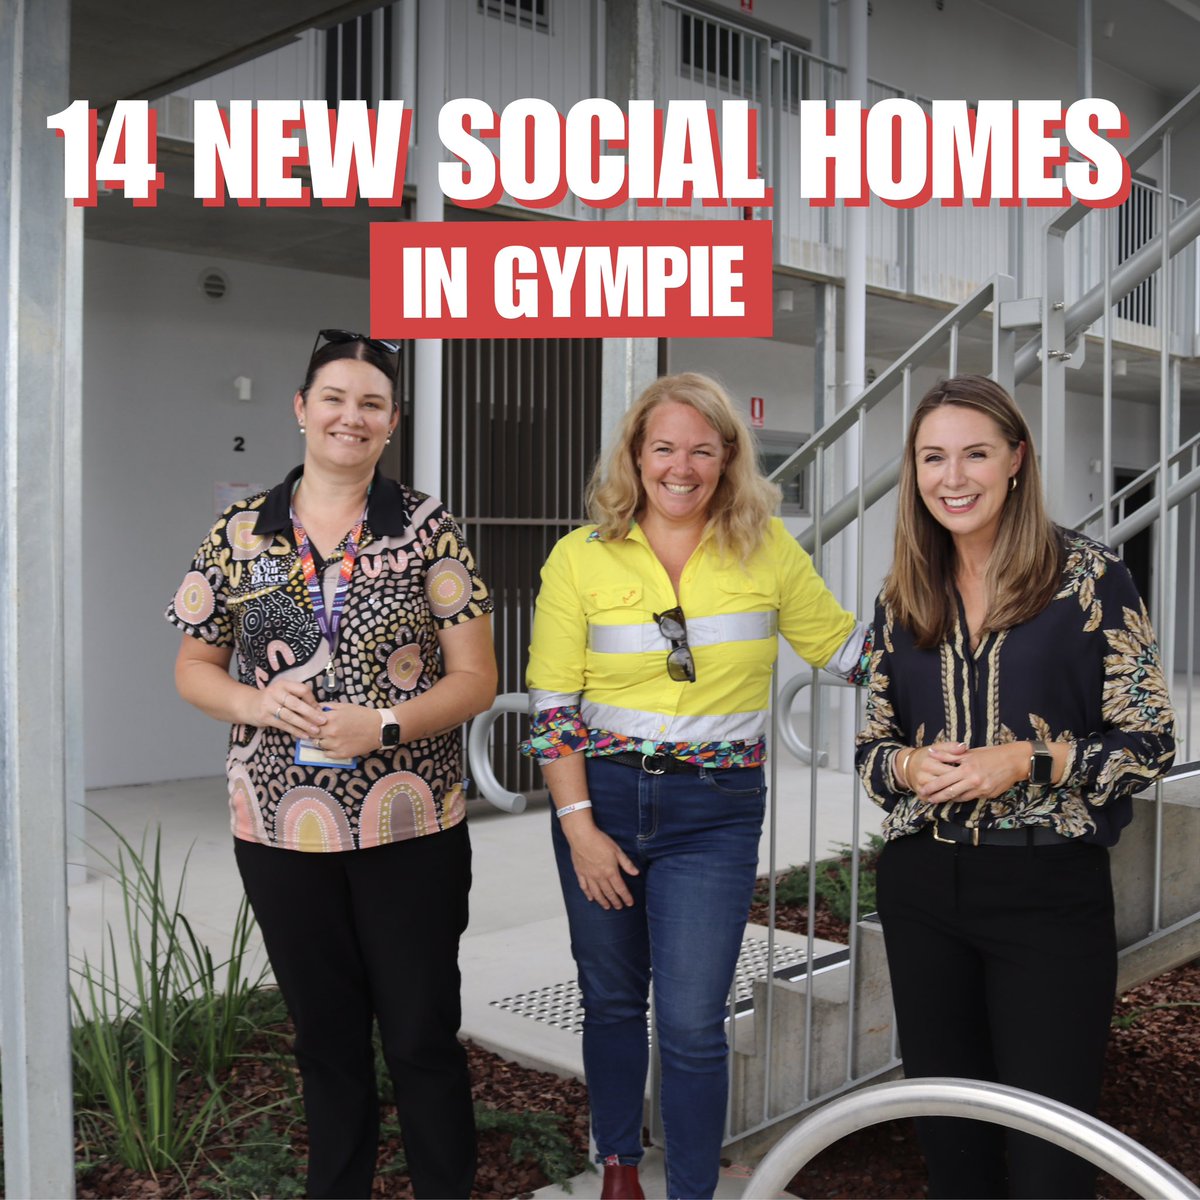 We’ve delivered 14 new social homes in Gympie for Queenslanders in need.
 
They have been designed with accessibility at the forefront, ensuring comfort and independence for residents of all abilities.